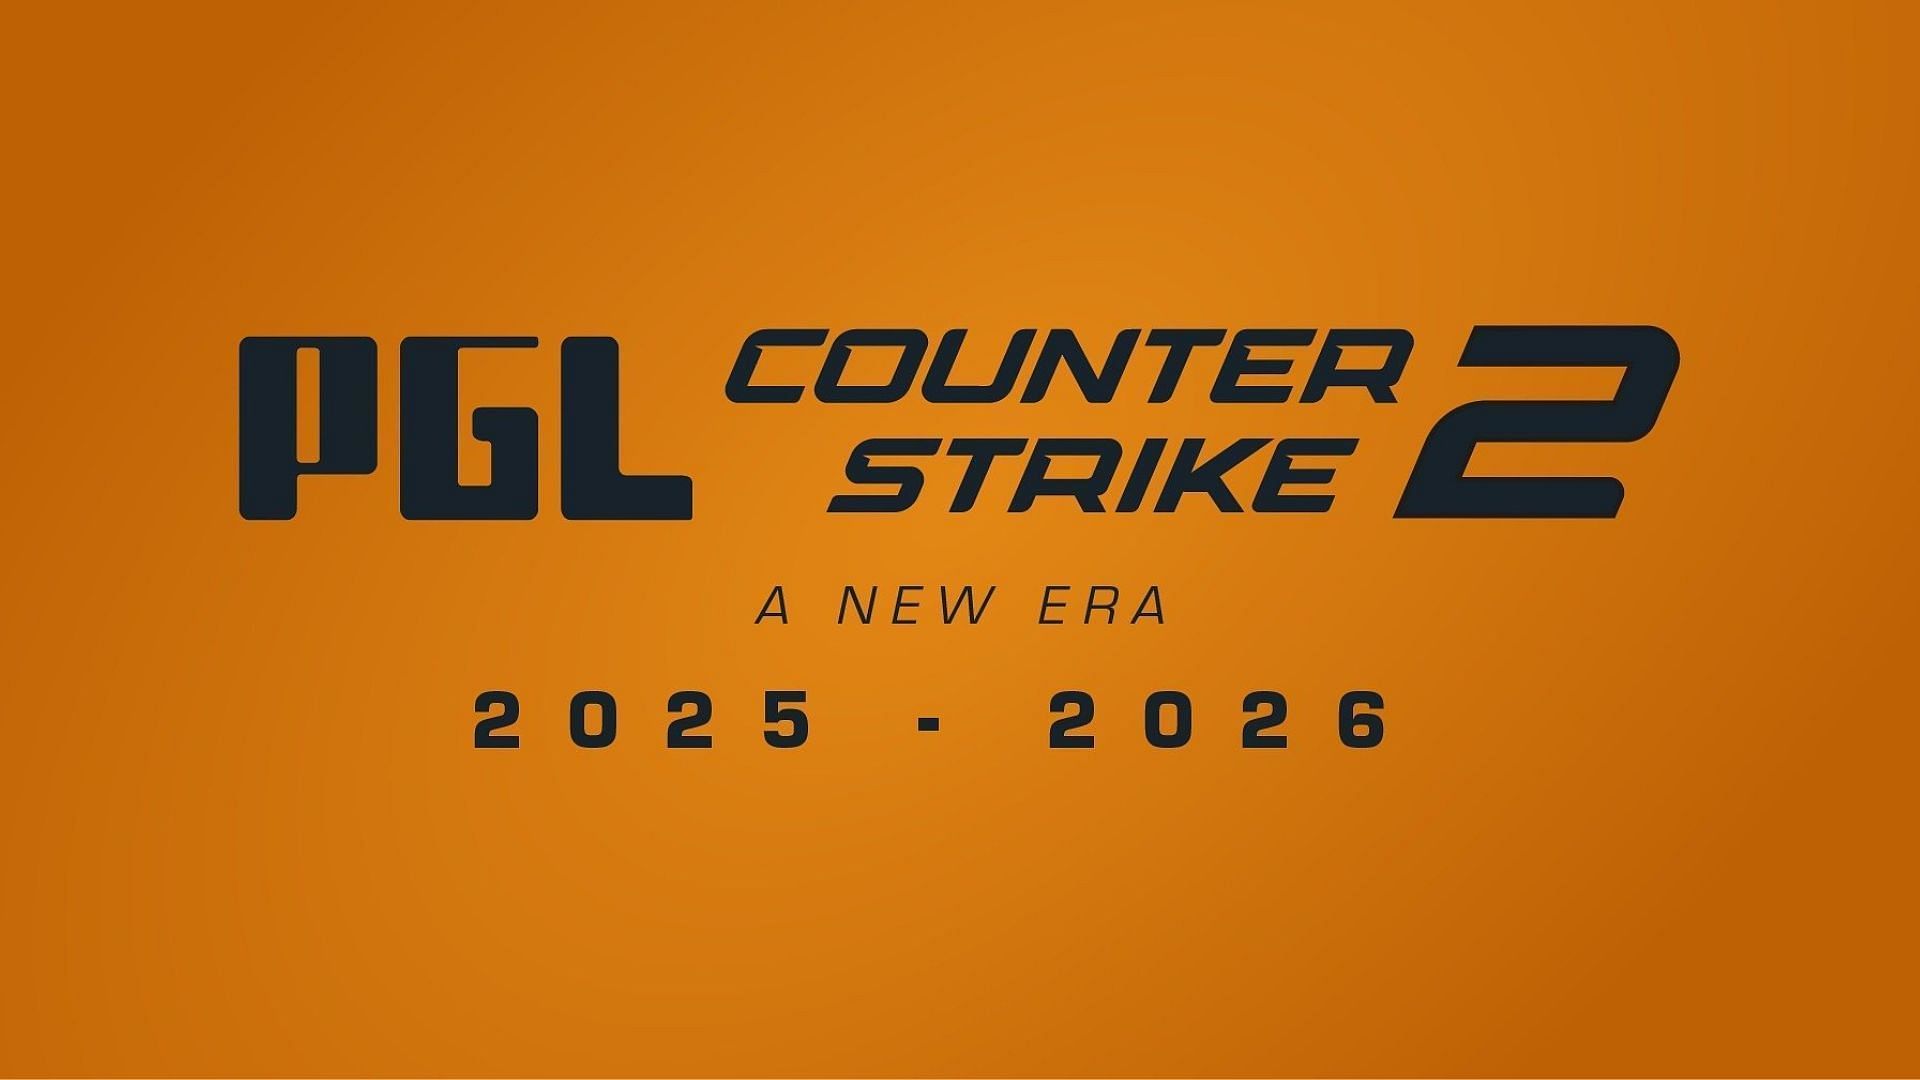 PGL announces several tournaments throughout 2025 and 2026